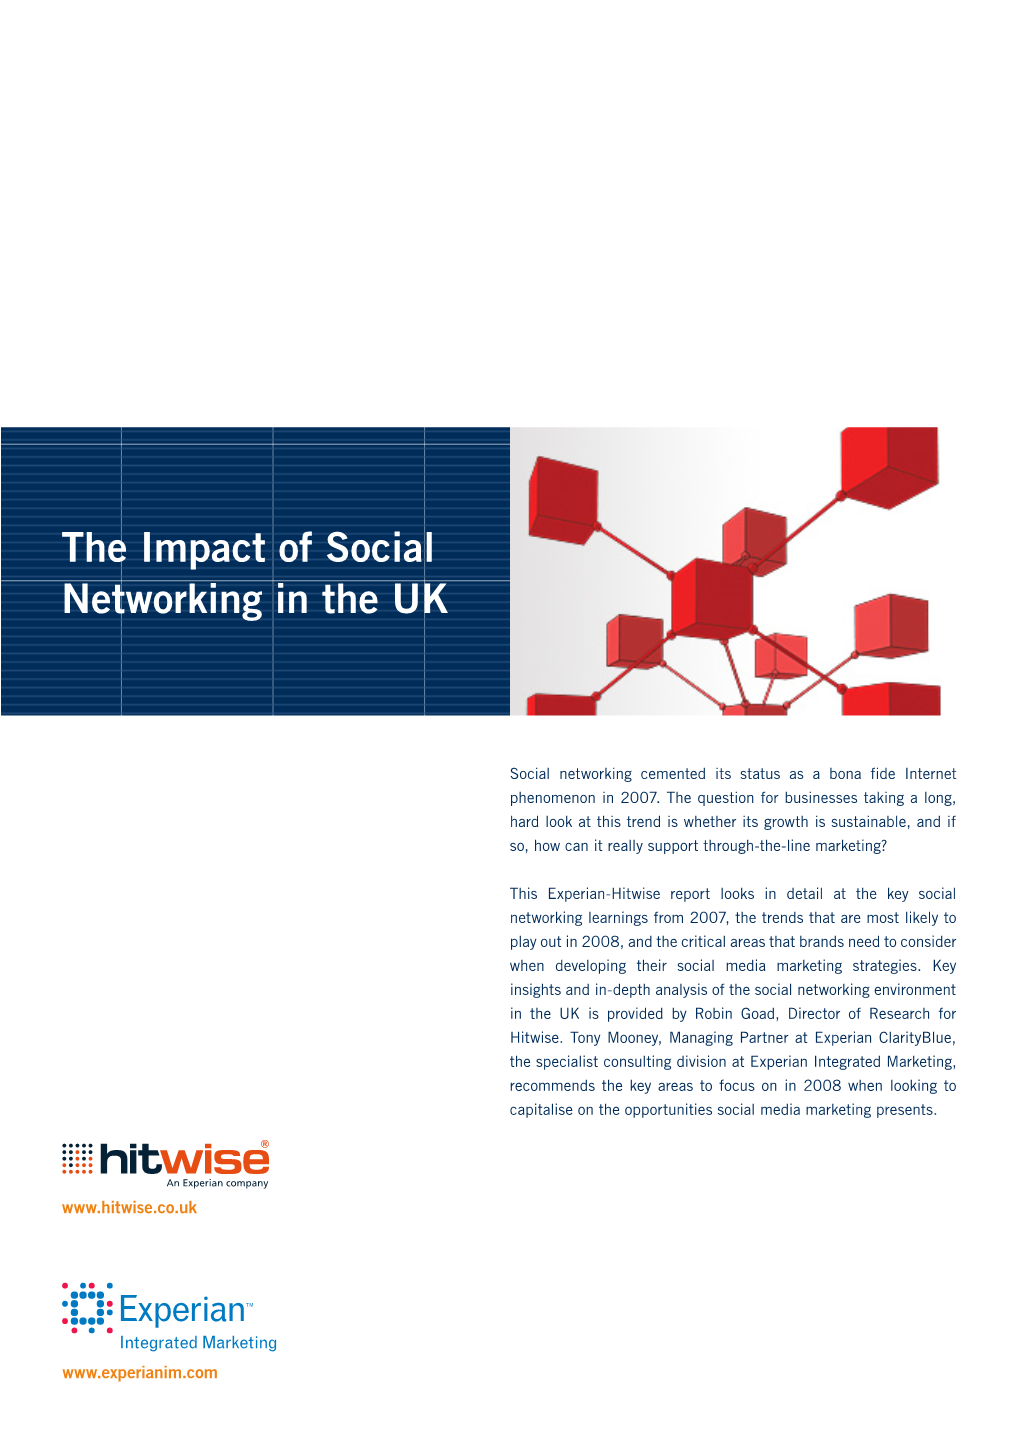 The Impact of Social Networking in the UK